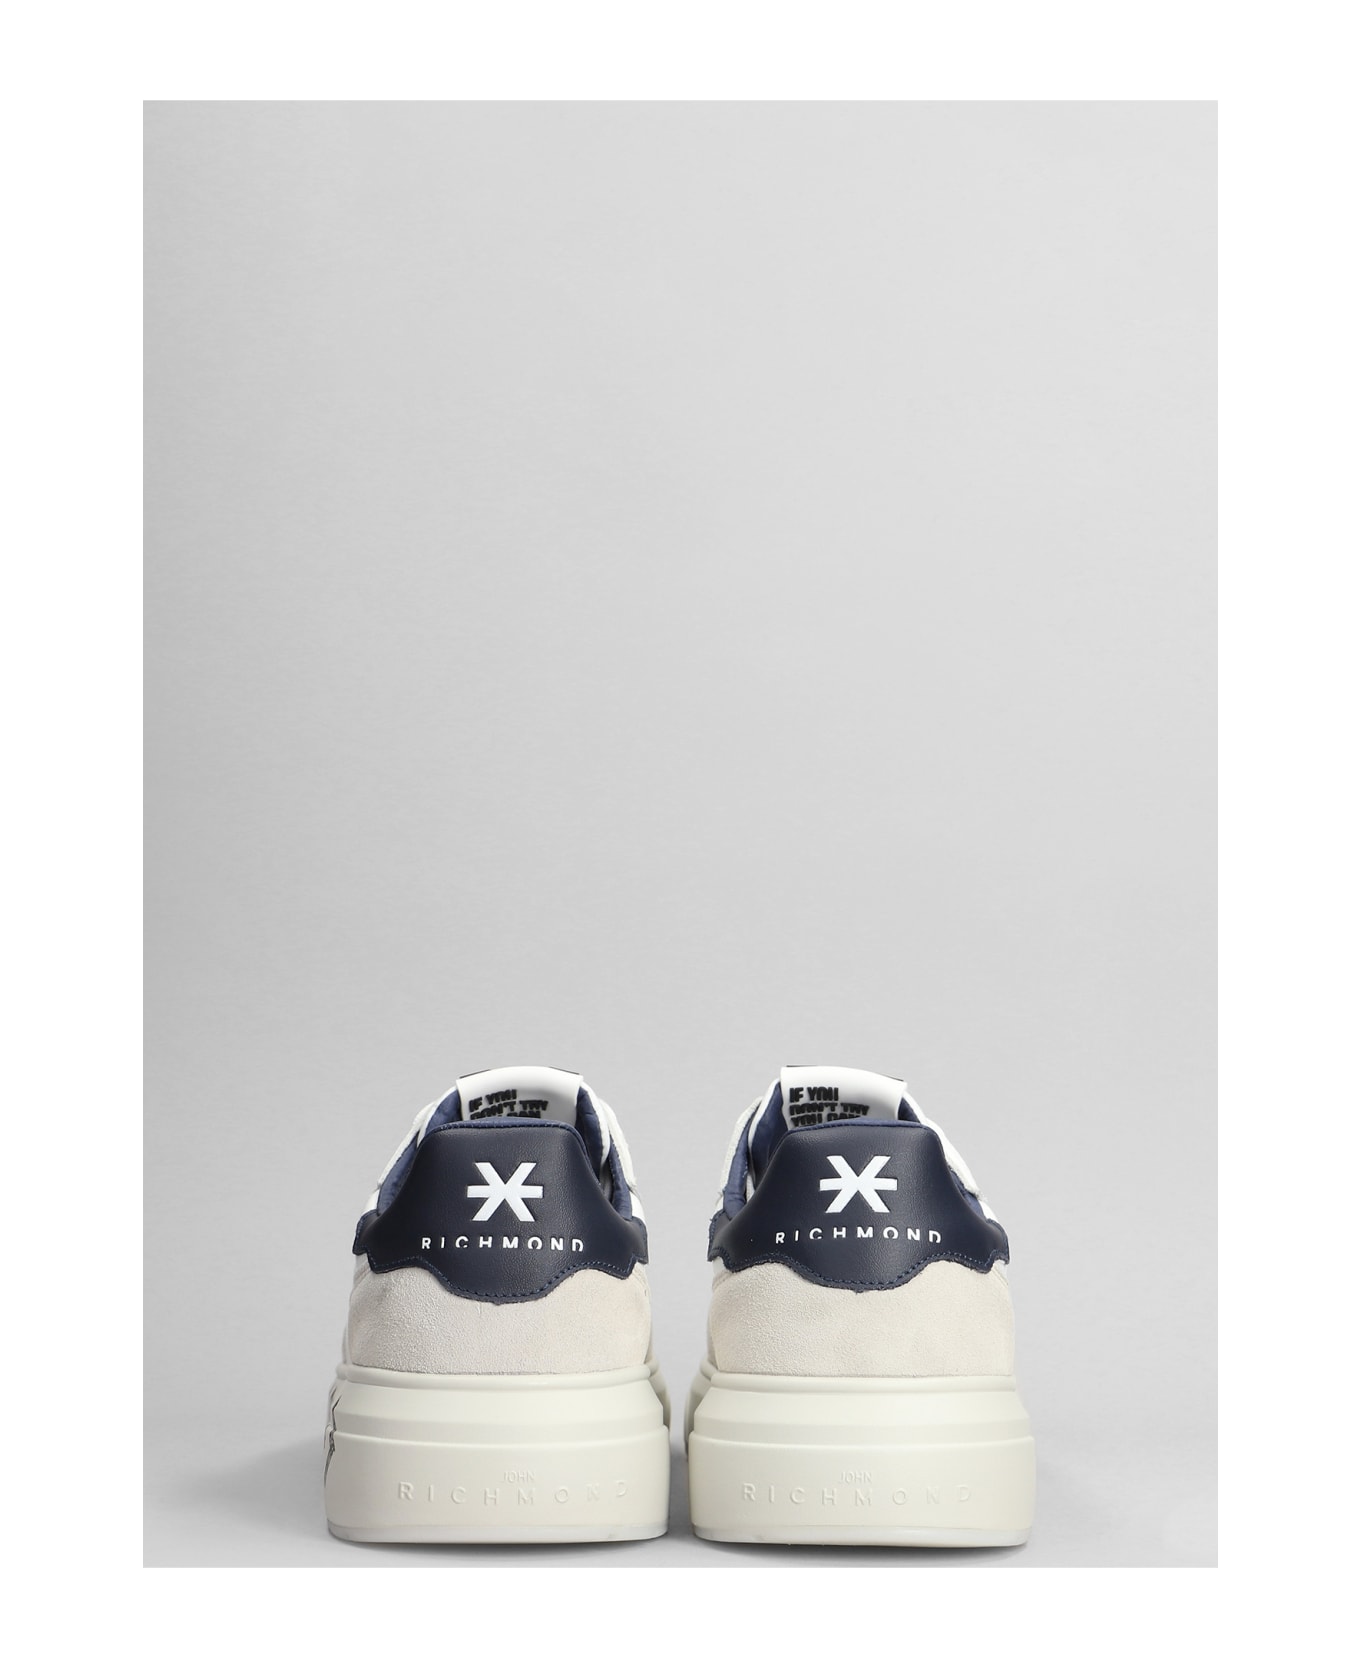 John Richmond Sneakers In White Suede And Leather - white